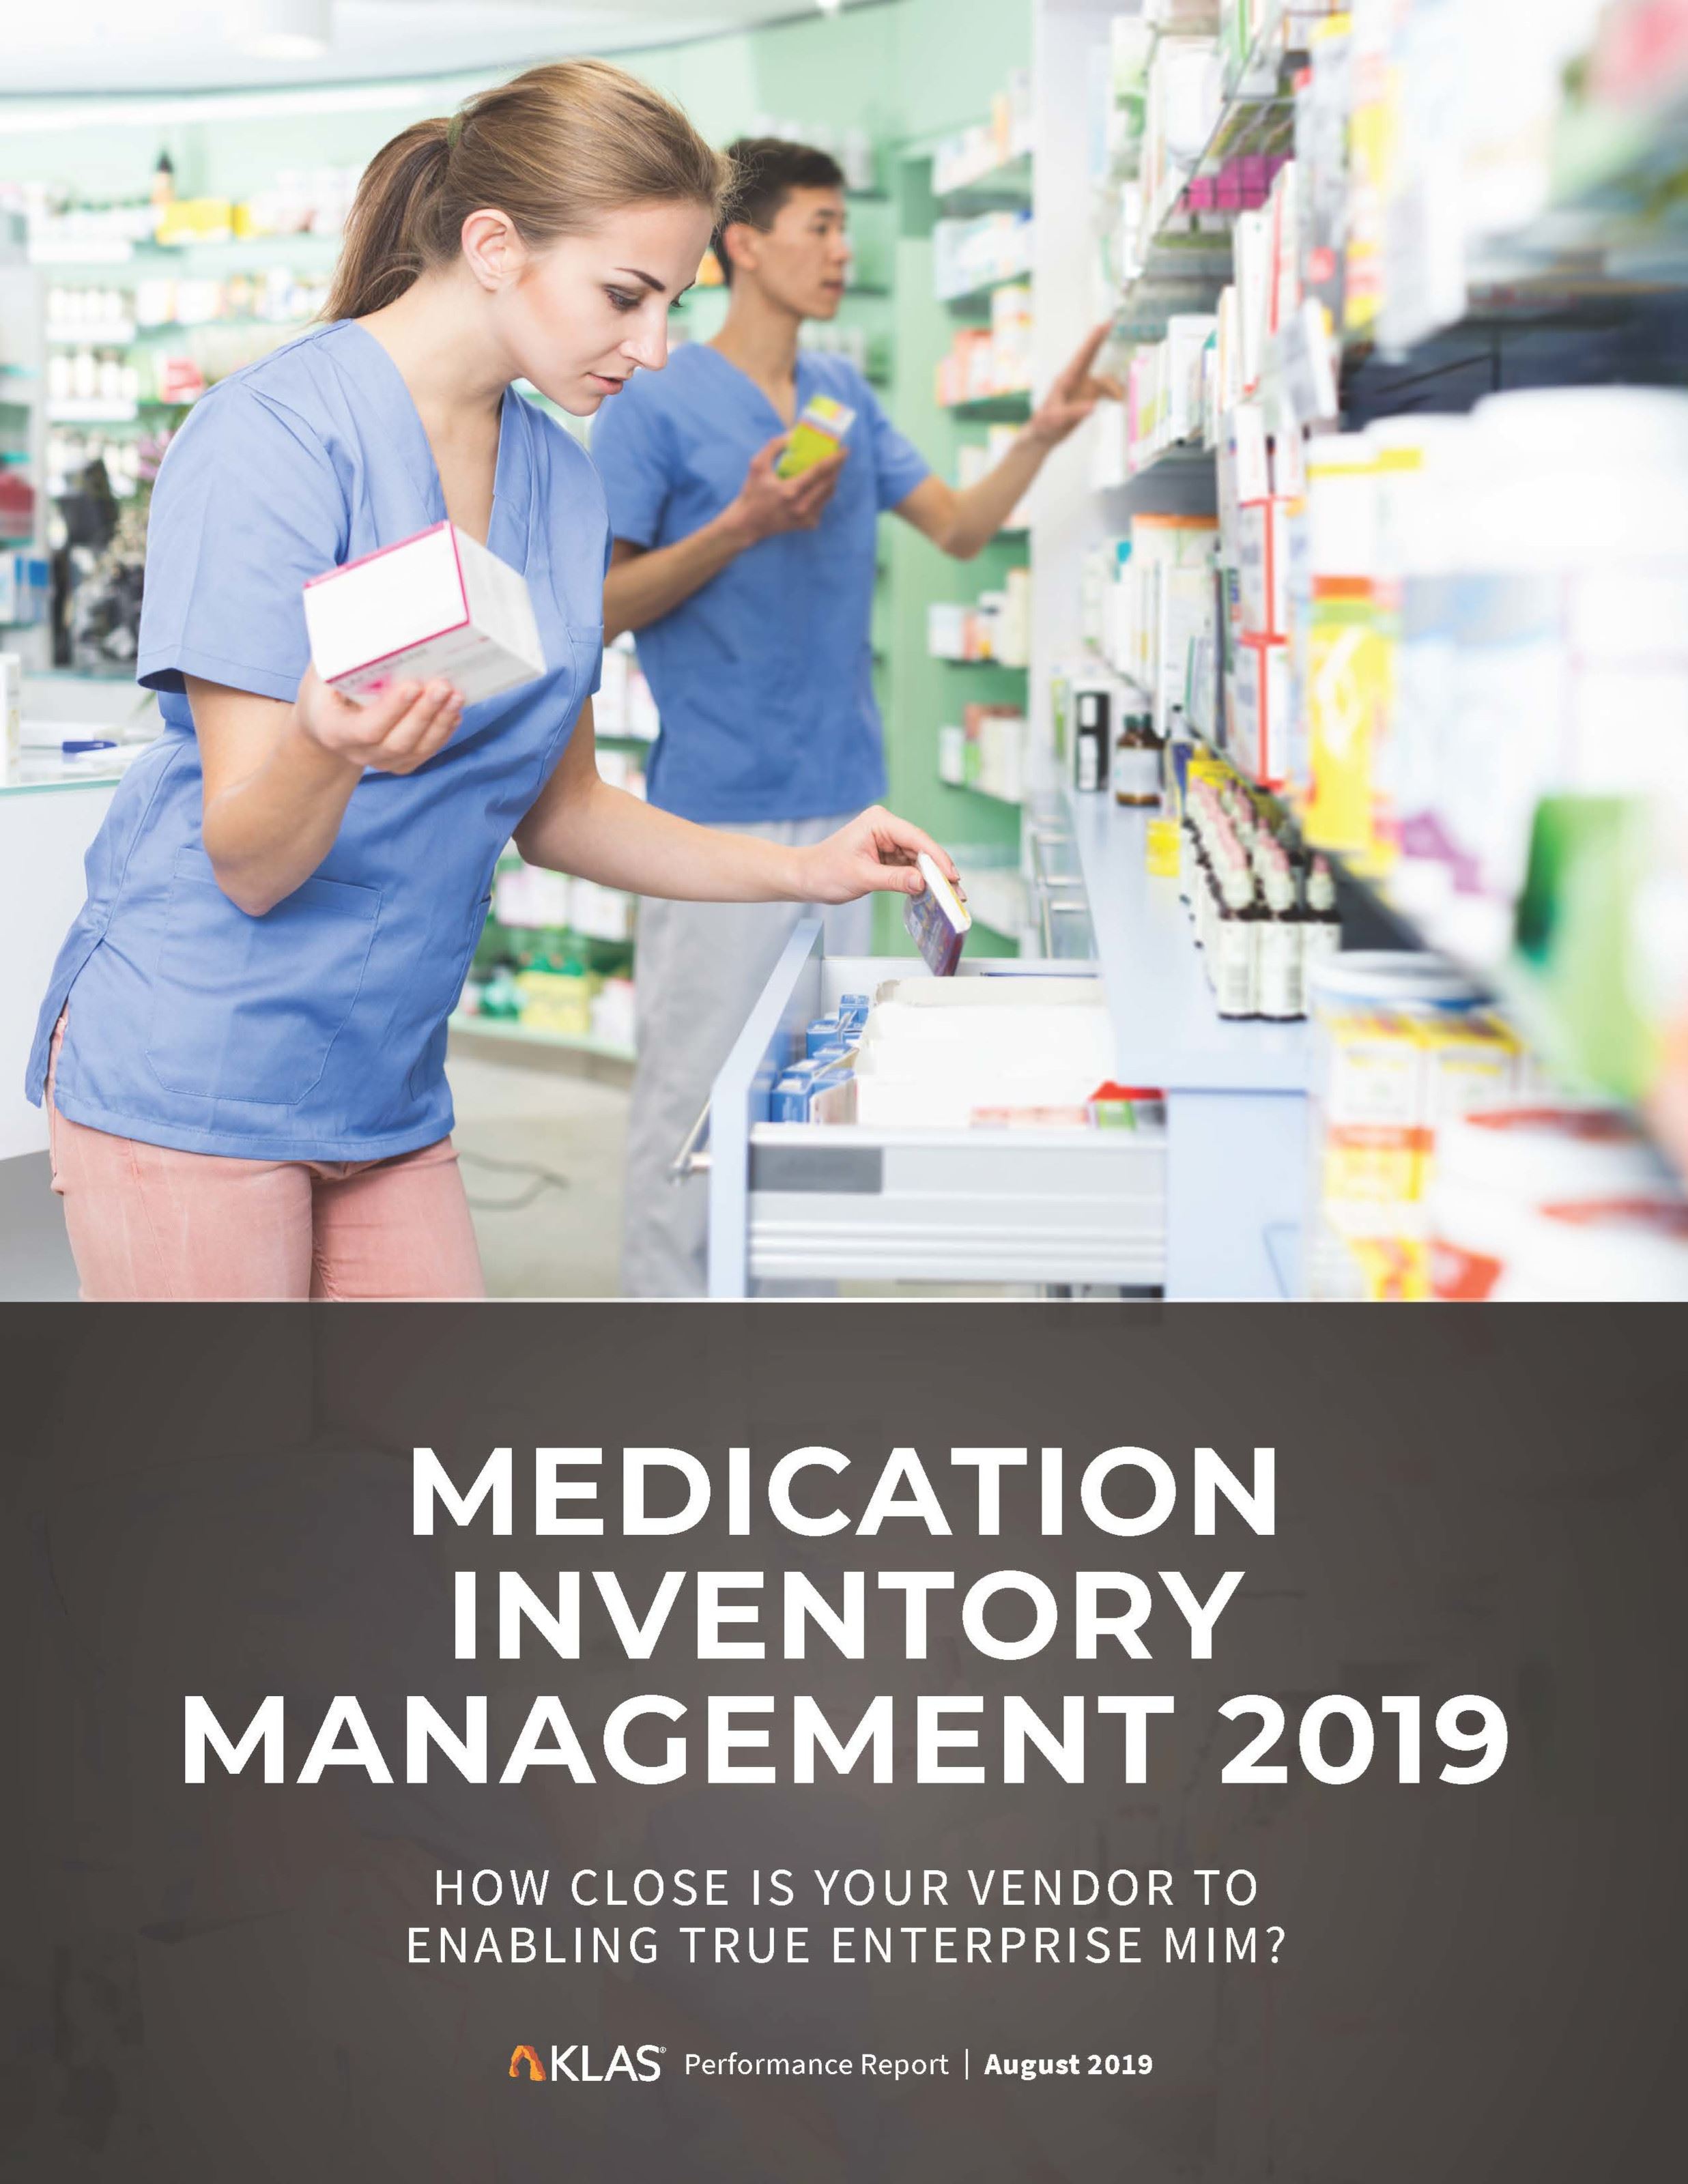 Medication Inventory Management 2019 How Close Is Your Vendor To